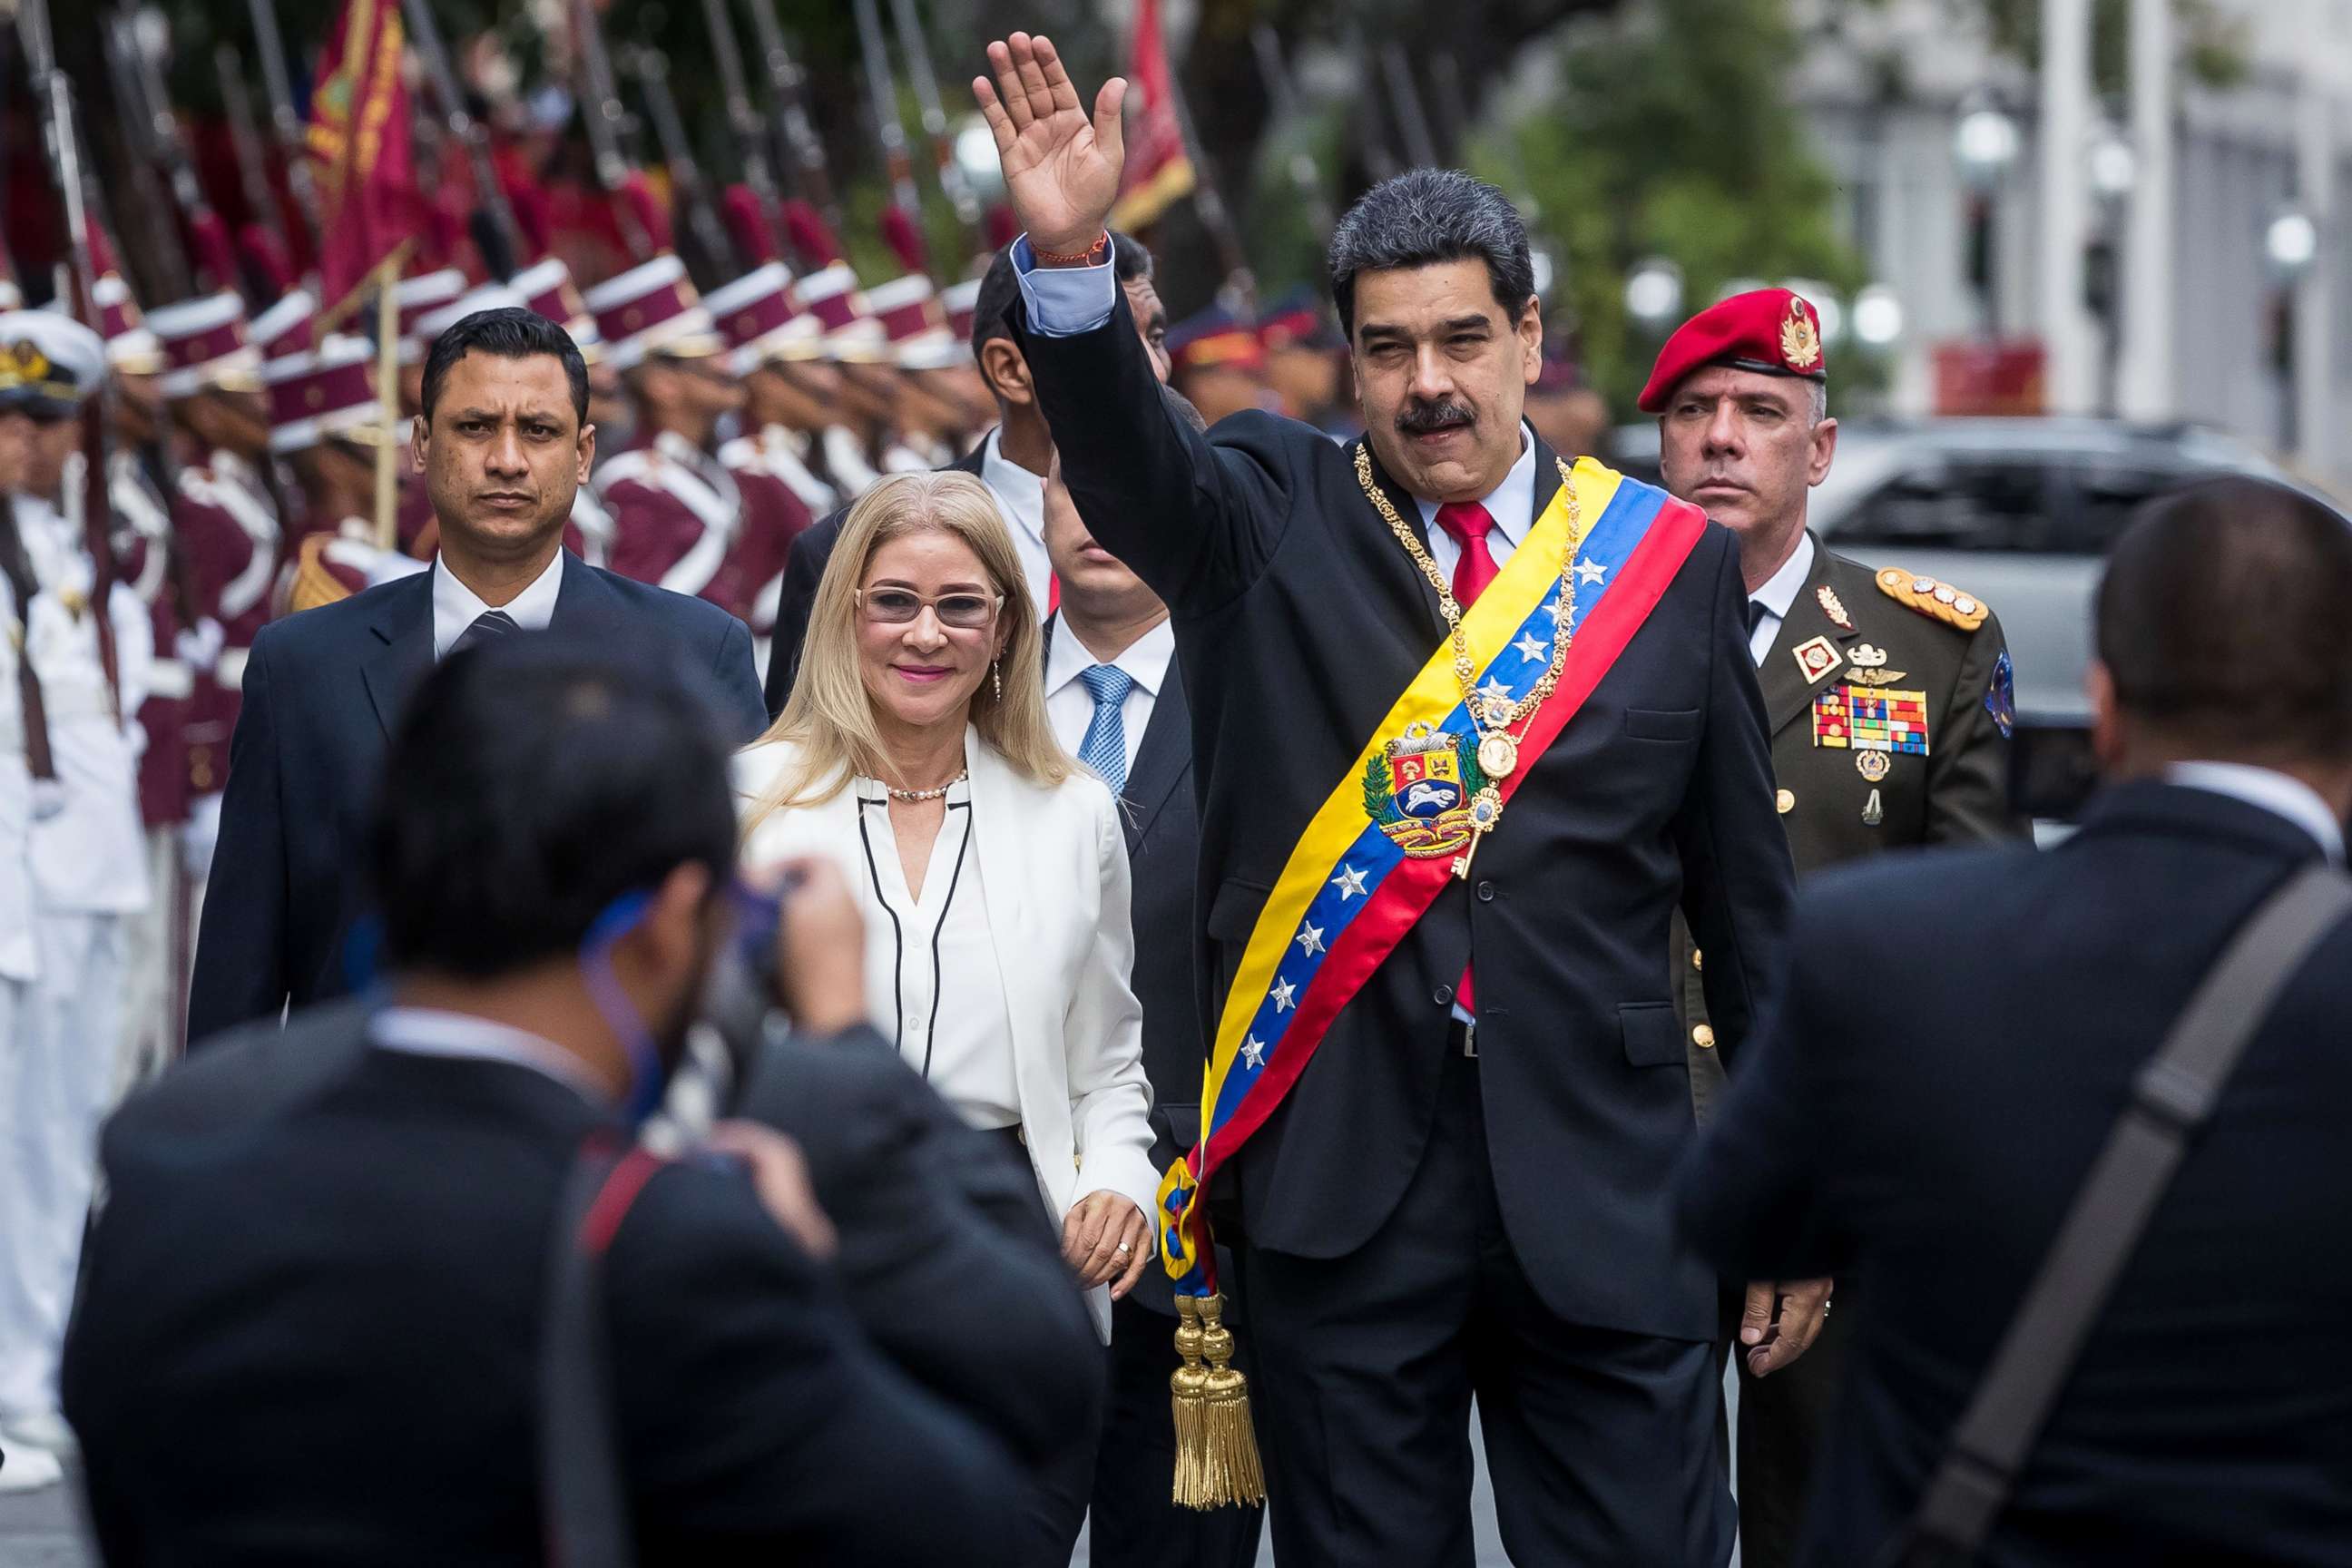 PHOTO: Venezuelan President Nicolas Maduro participates in an event to commemorate the 20 years of the referendum approving the Constitution of the Bolivarian Republic in Caracas, Venezuela, Dec. 15, 2019.